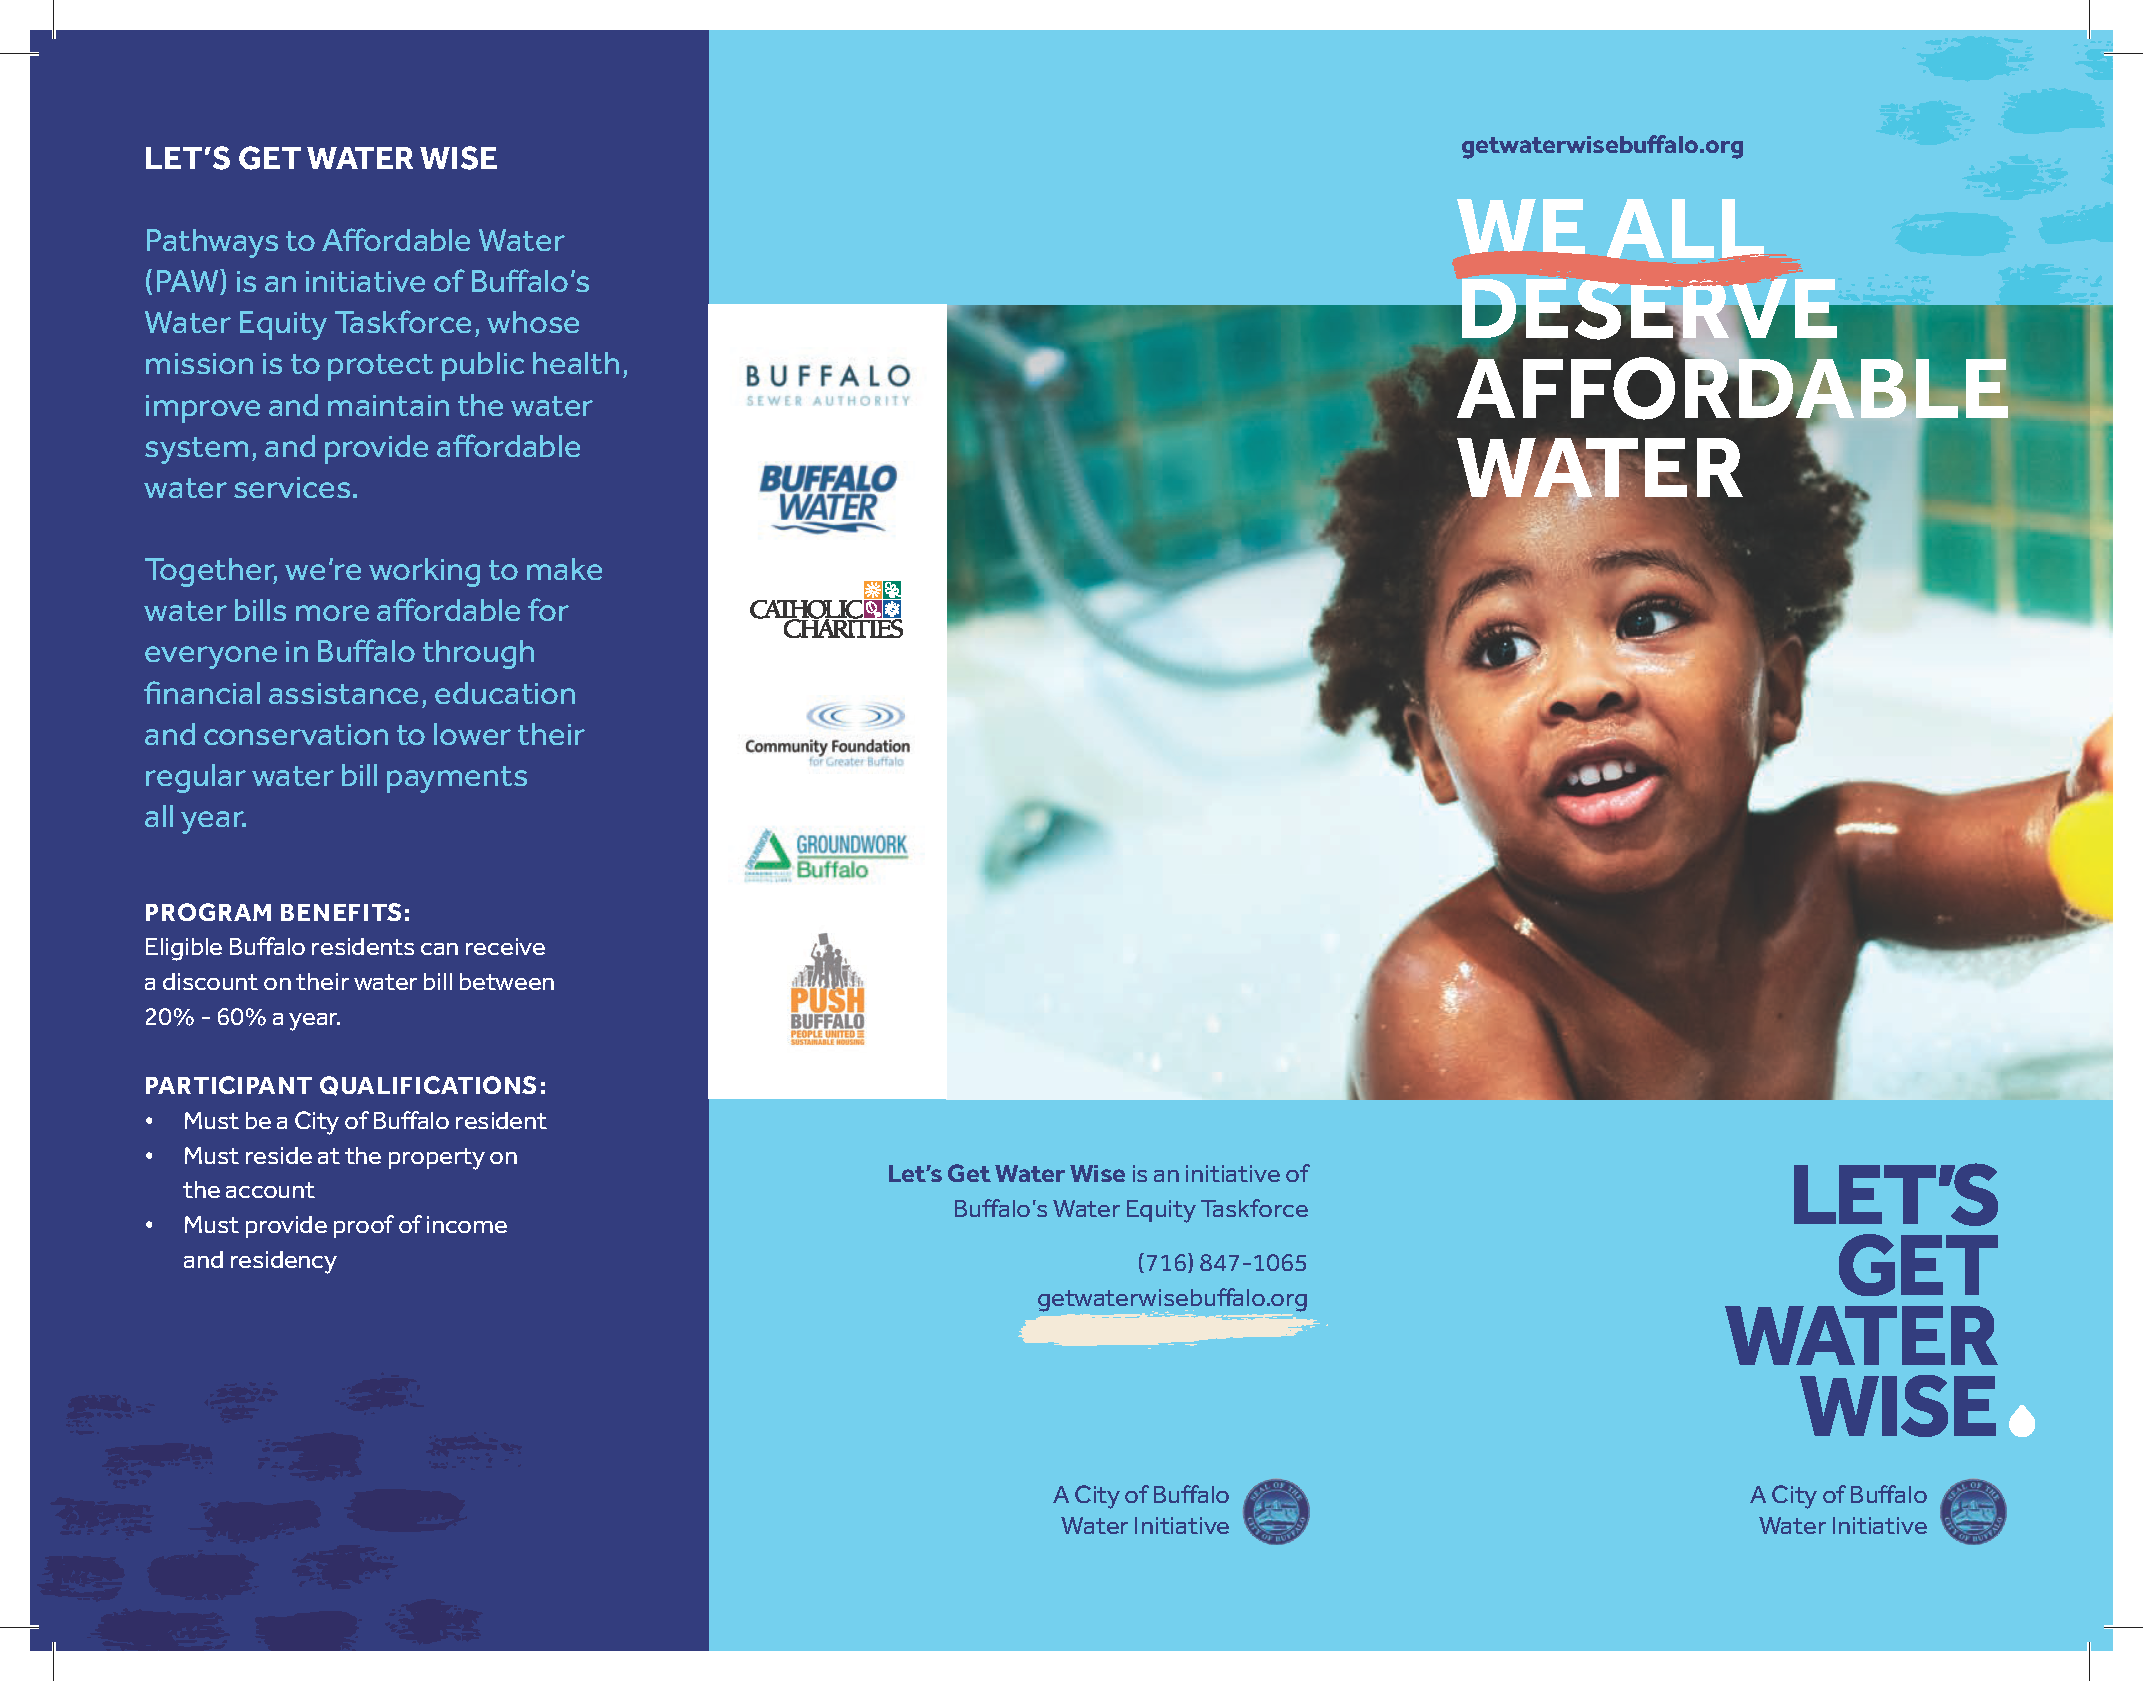 Let's Get Water Pathways to Affordable Water – Buffalo